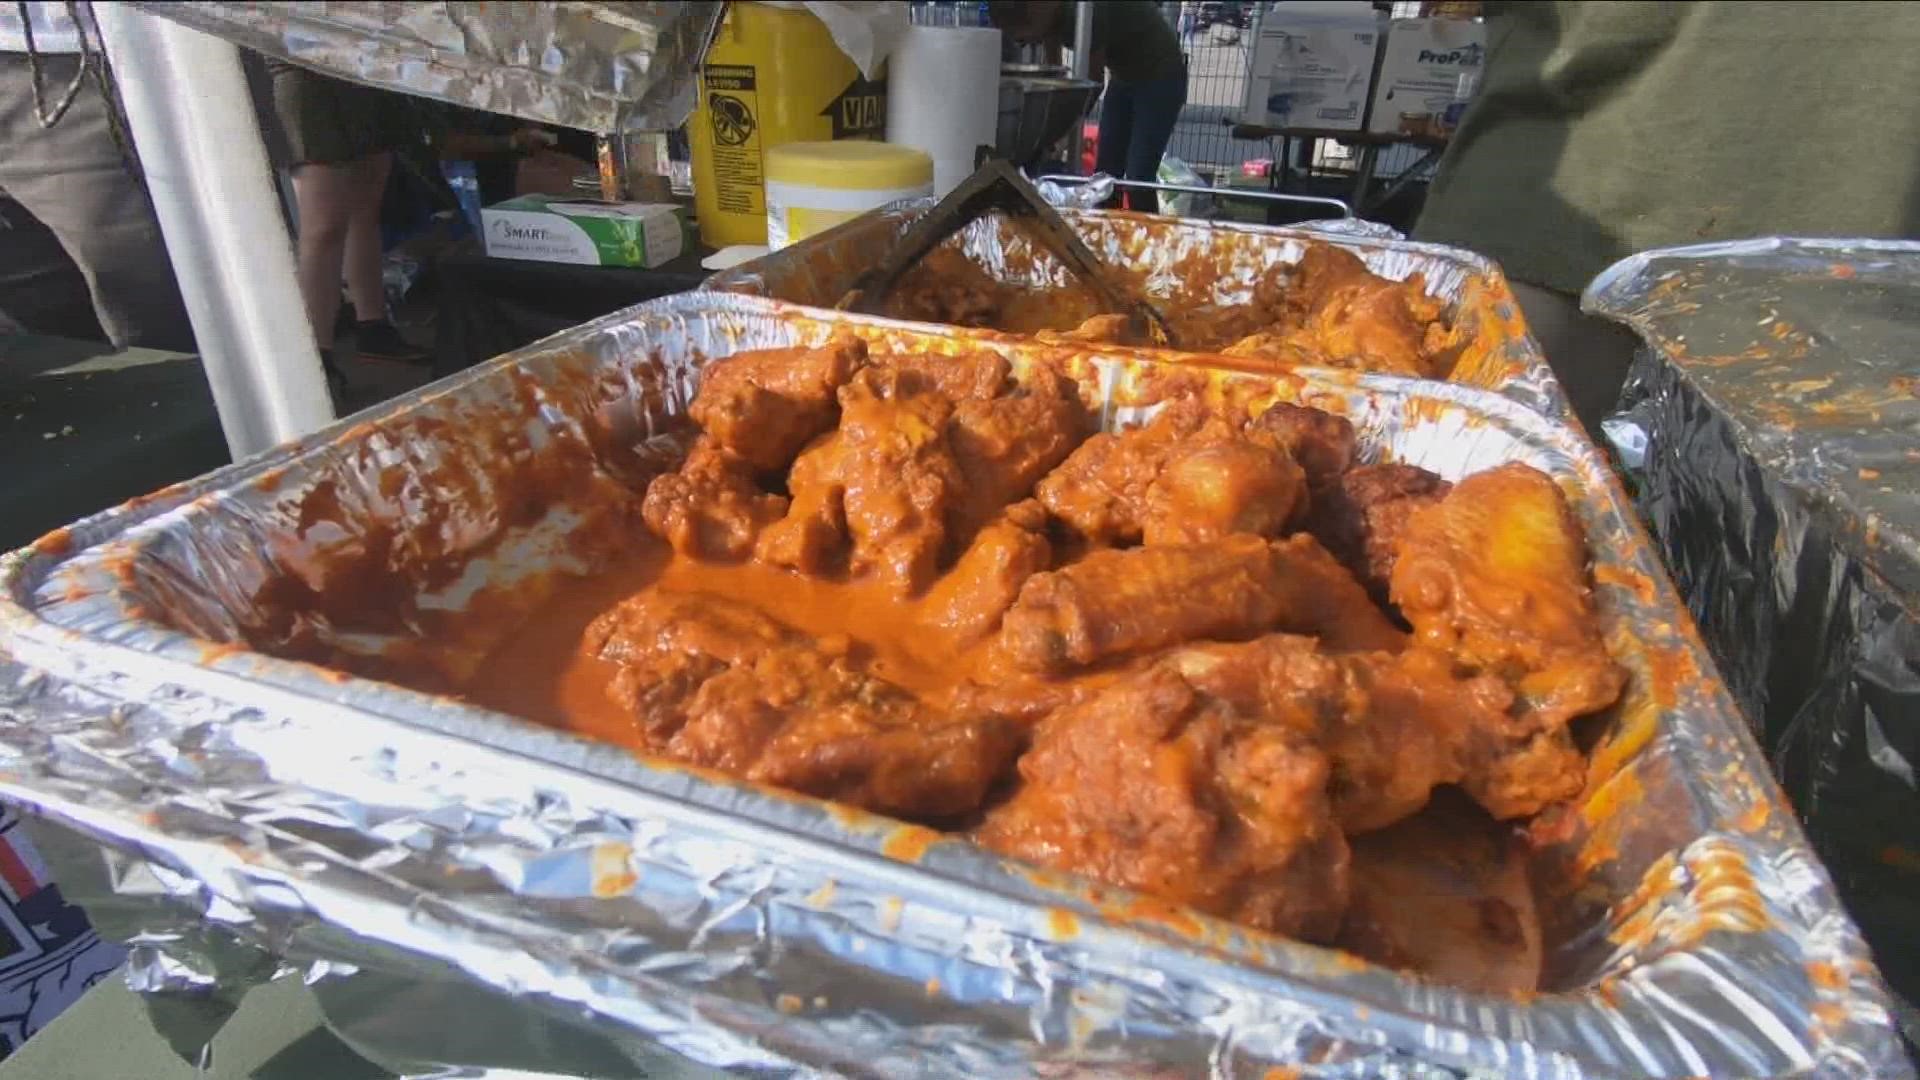 This labor day weekend, nearly 20 restaurants are sharing their spices and sauces with Buffalo.